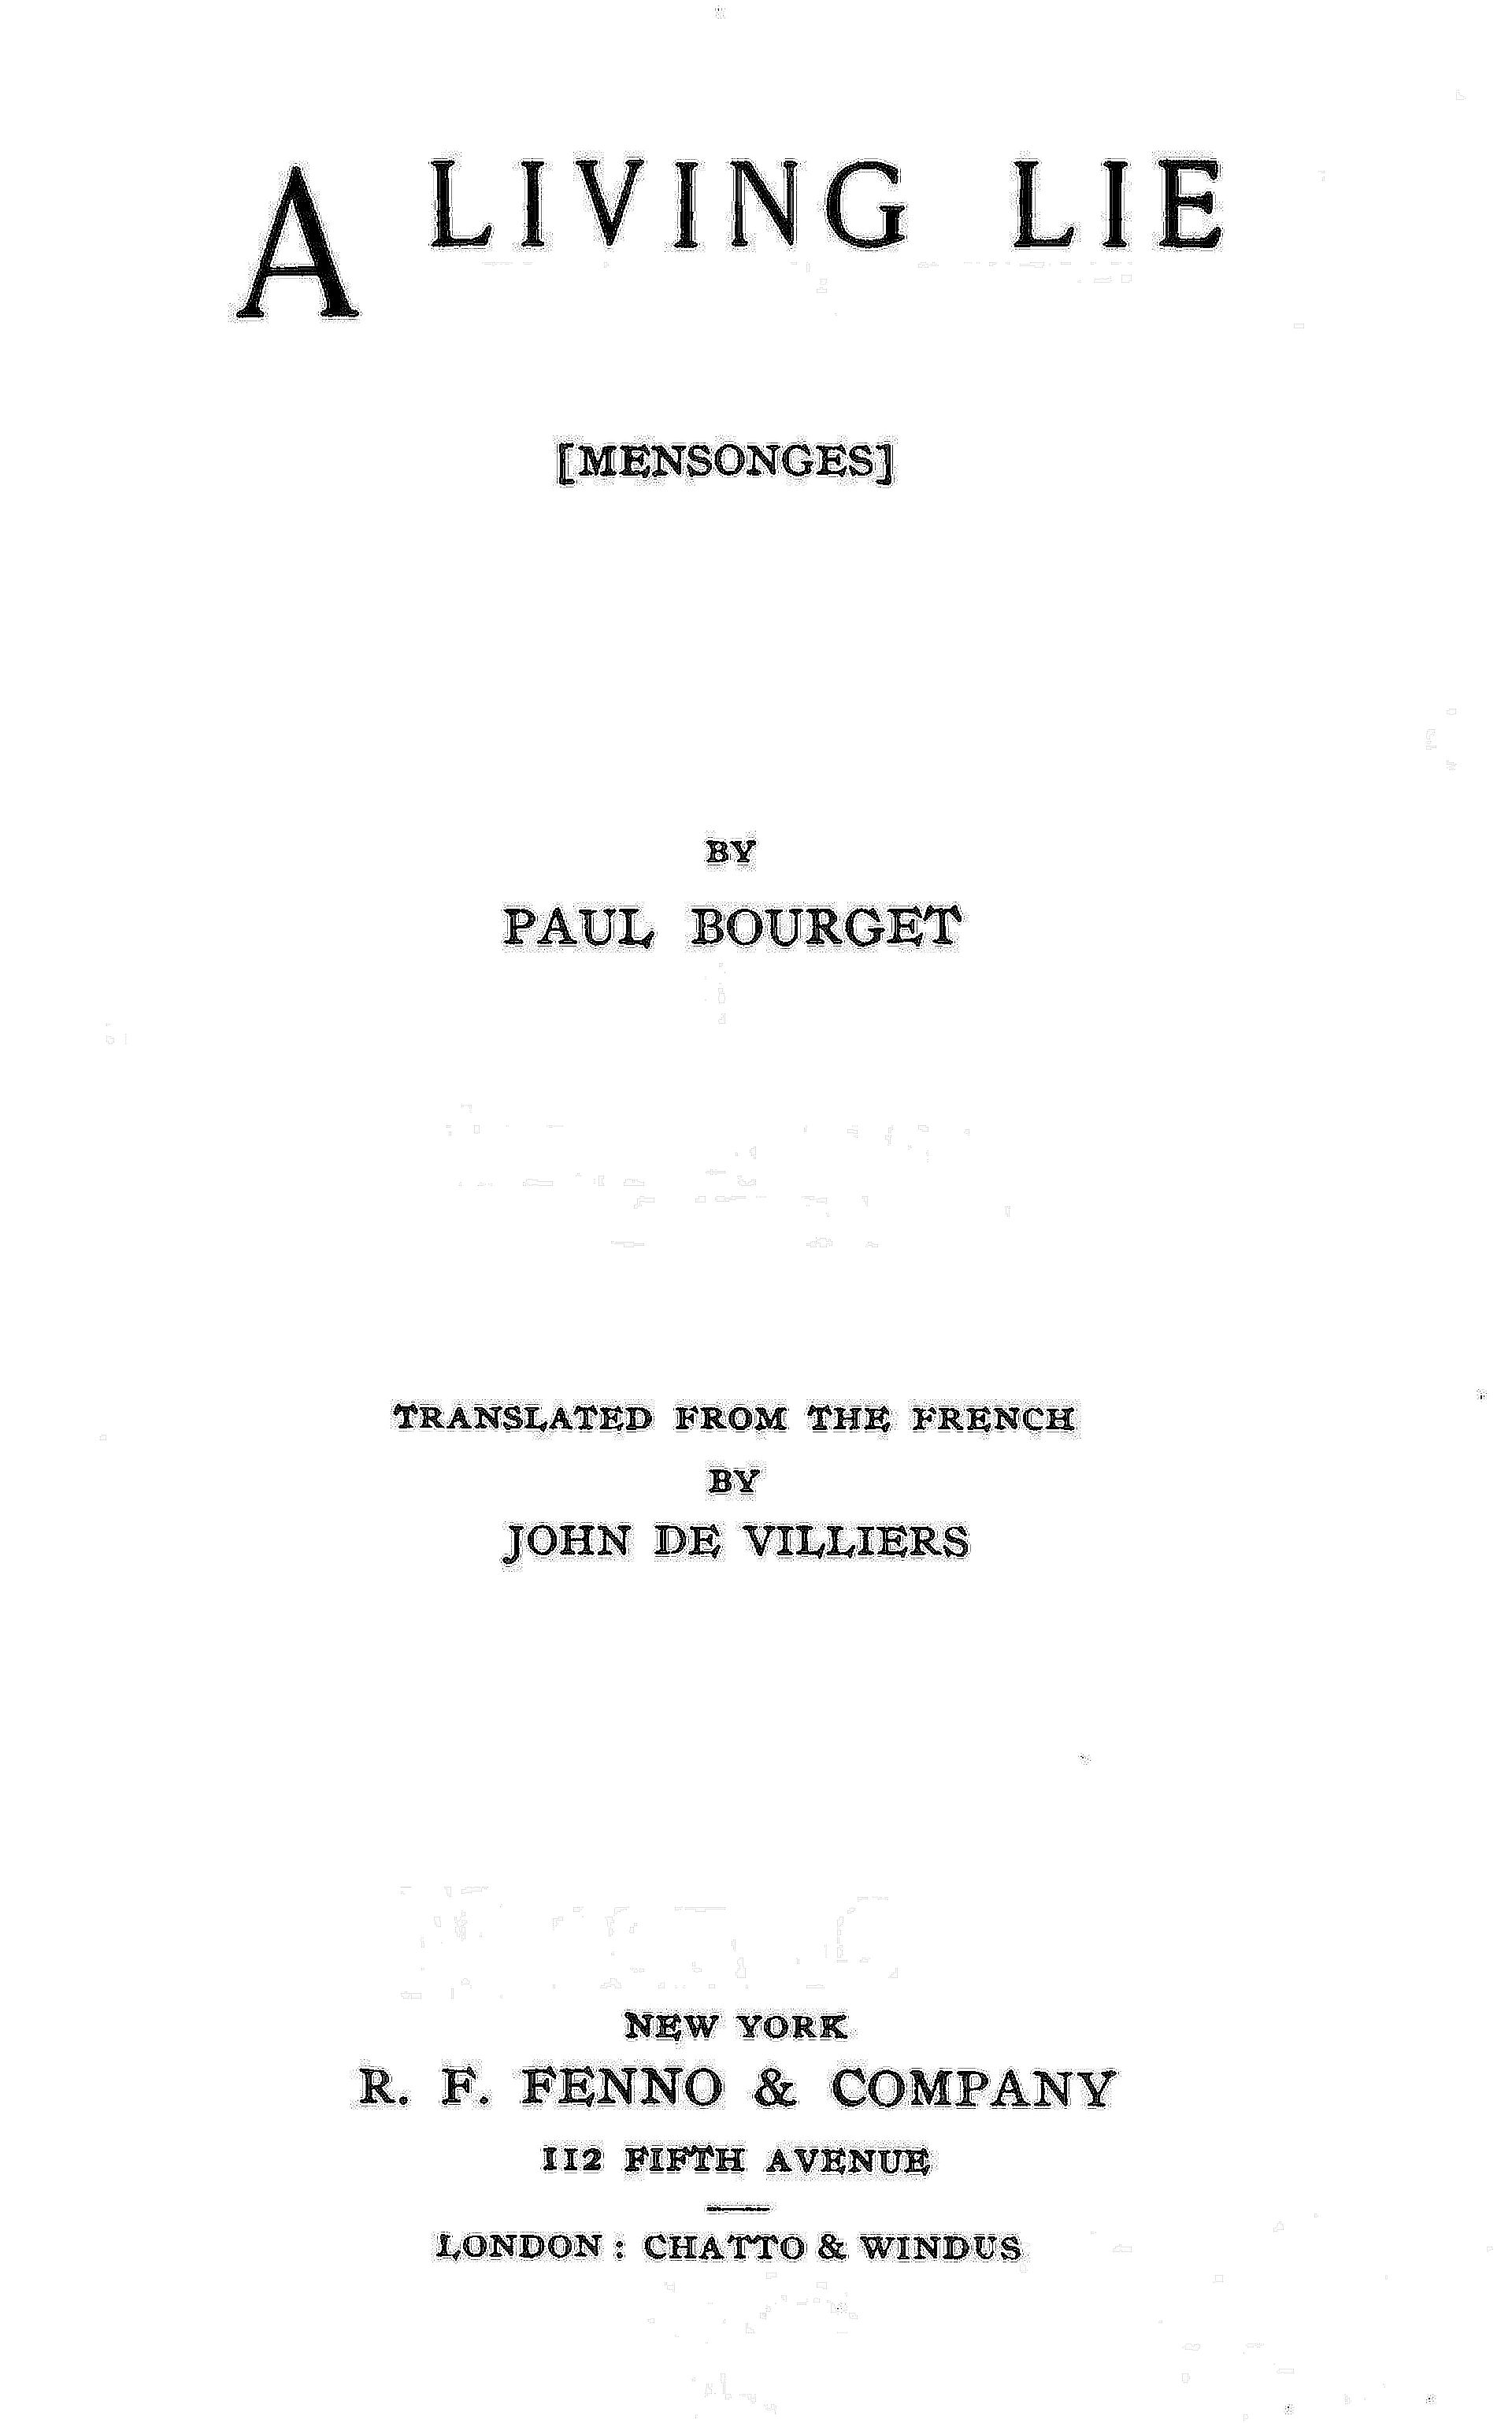 The Project Gutenberg eBook of A Living Lie, by Paul Bourget.